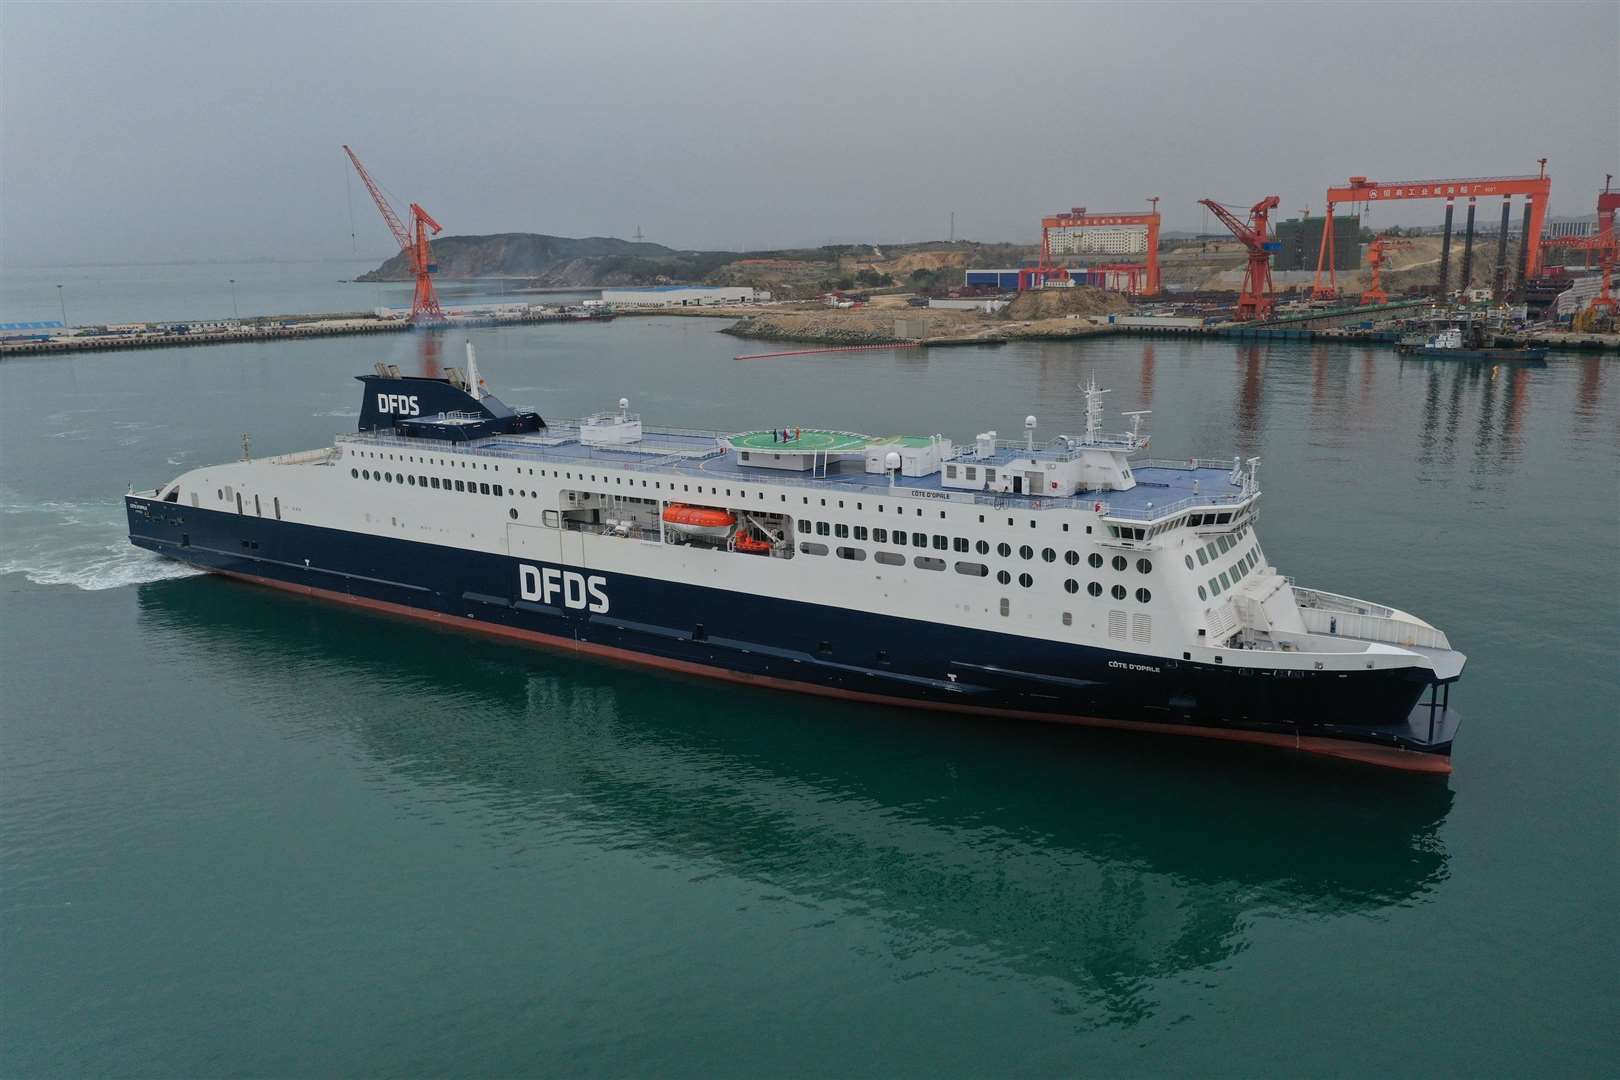 The new DFDS ferry Côte d’Opale left the Weihei shipyard in China on Thursday